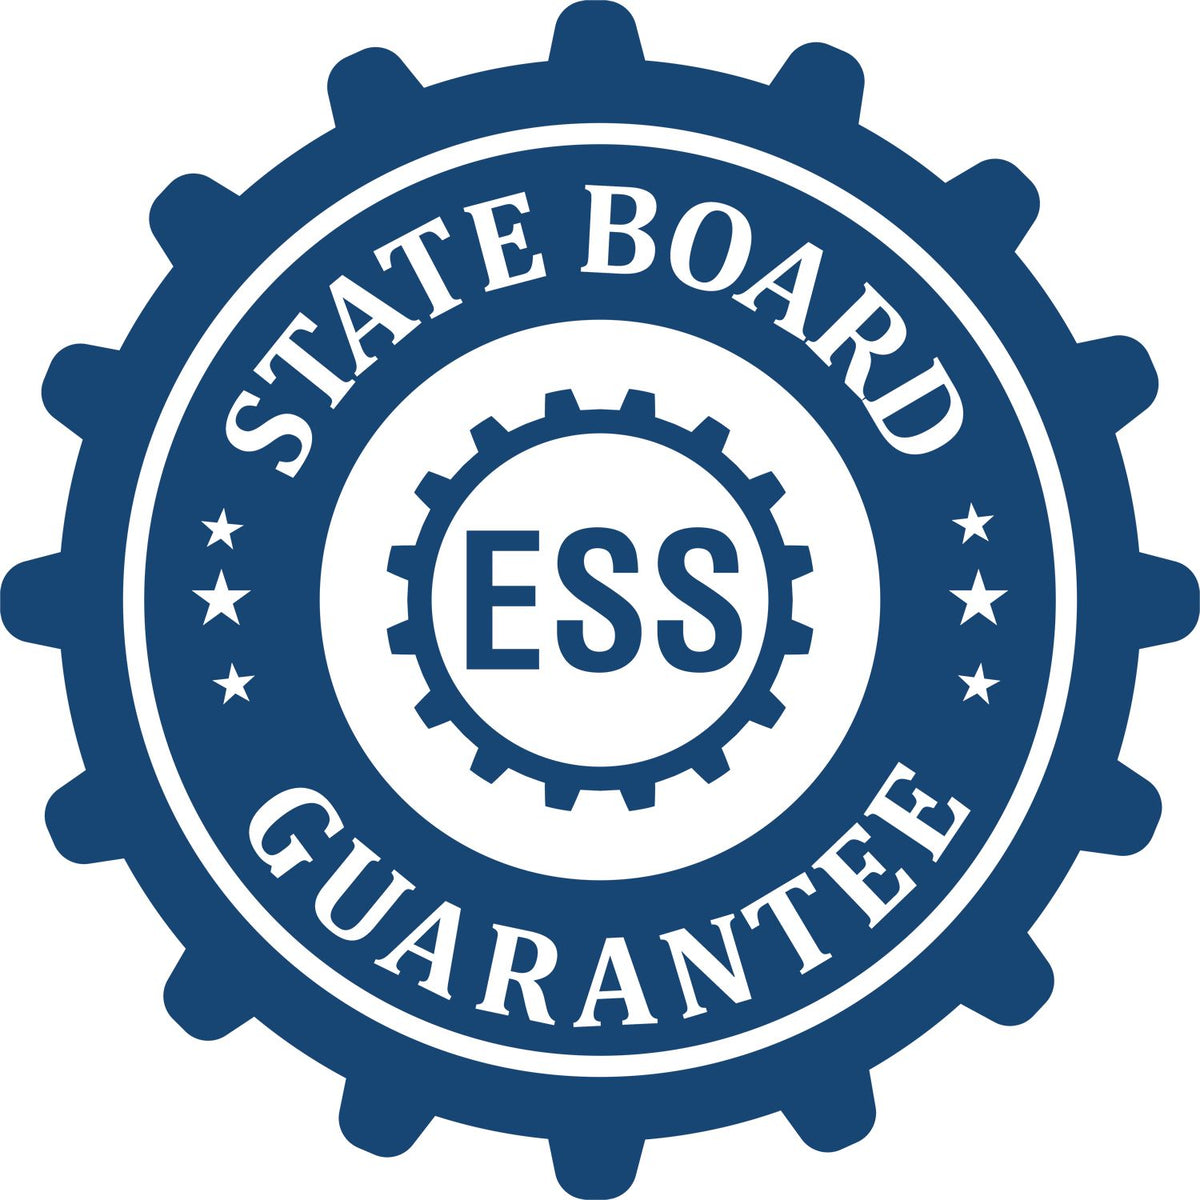 An emblem in a gear shape illustrating a state board guarantee for the Hybrid Massachusetts Land Surveyor Seal